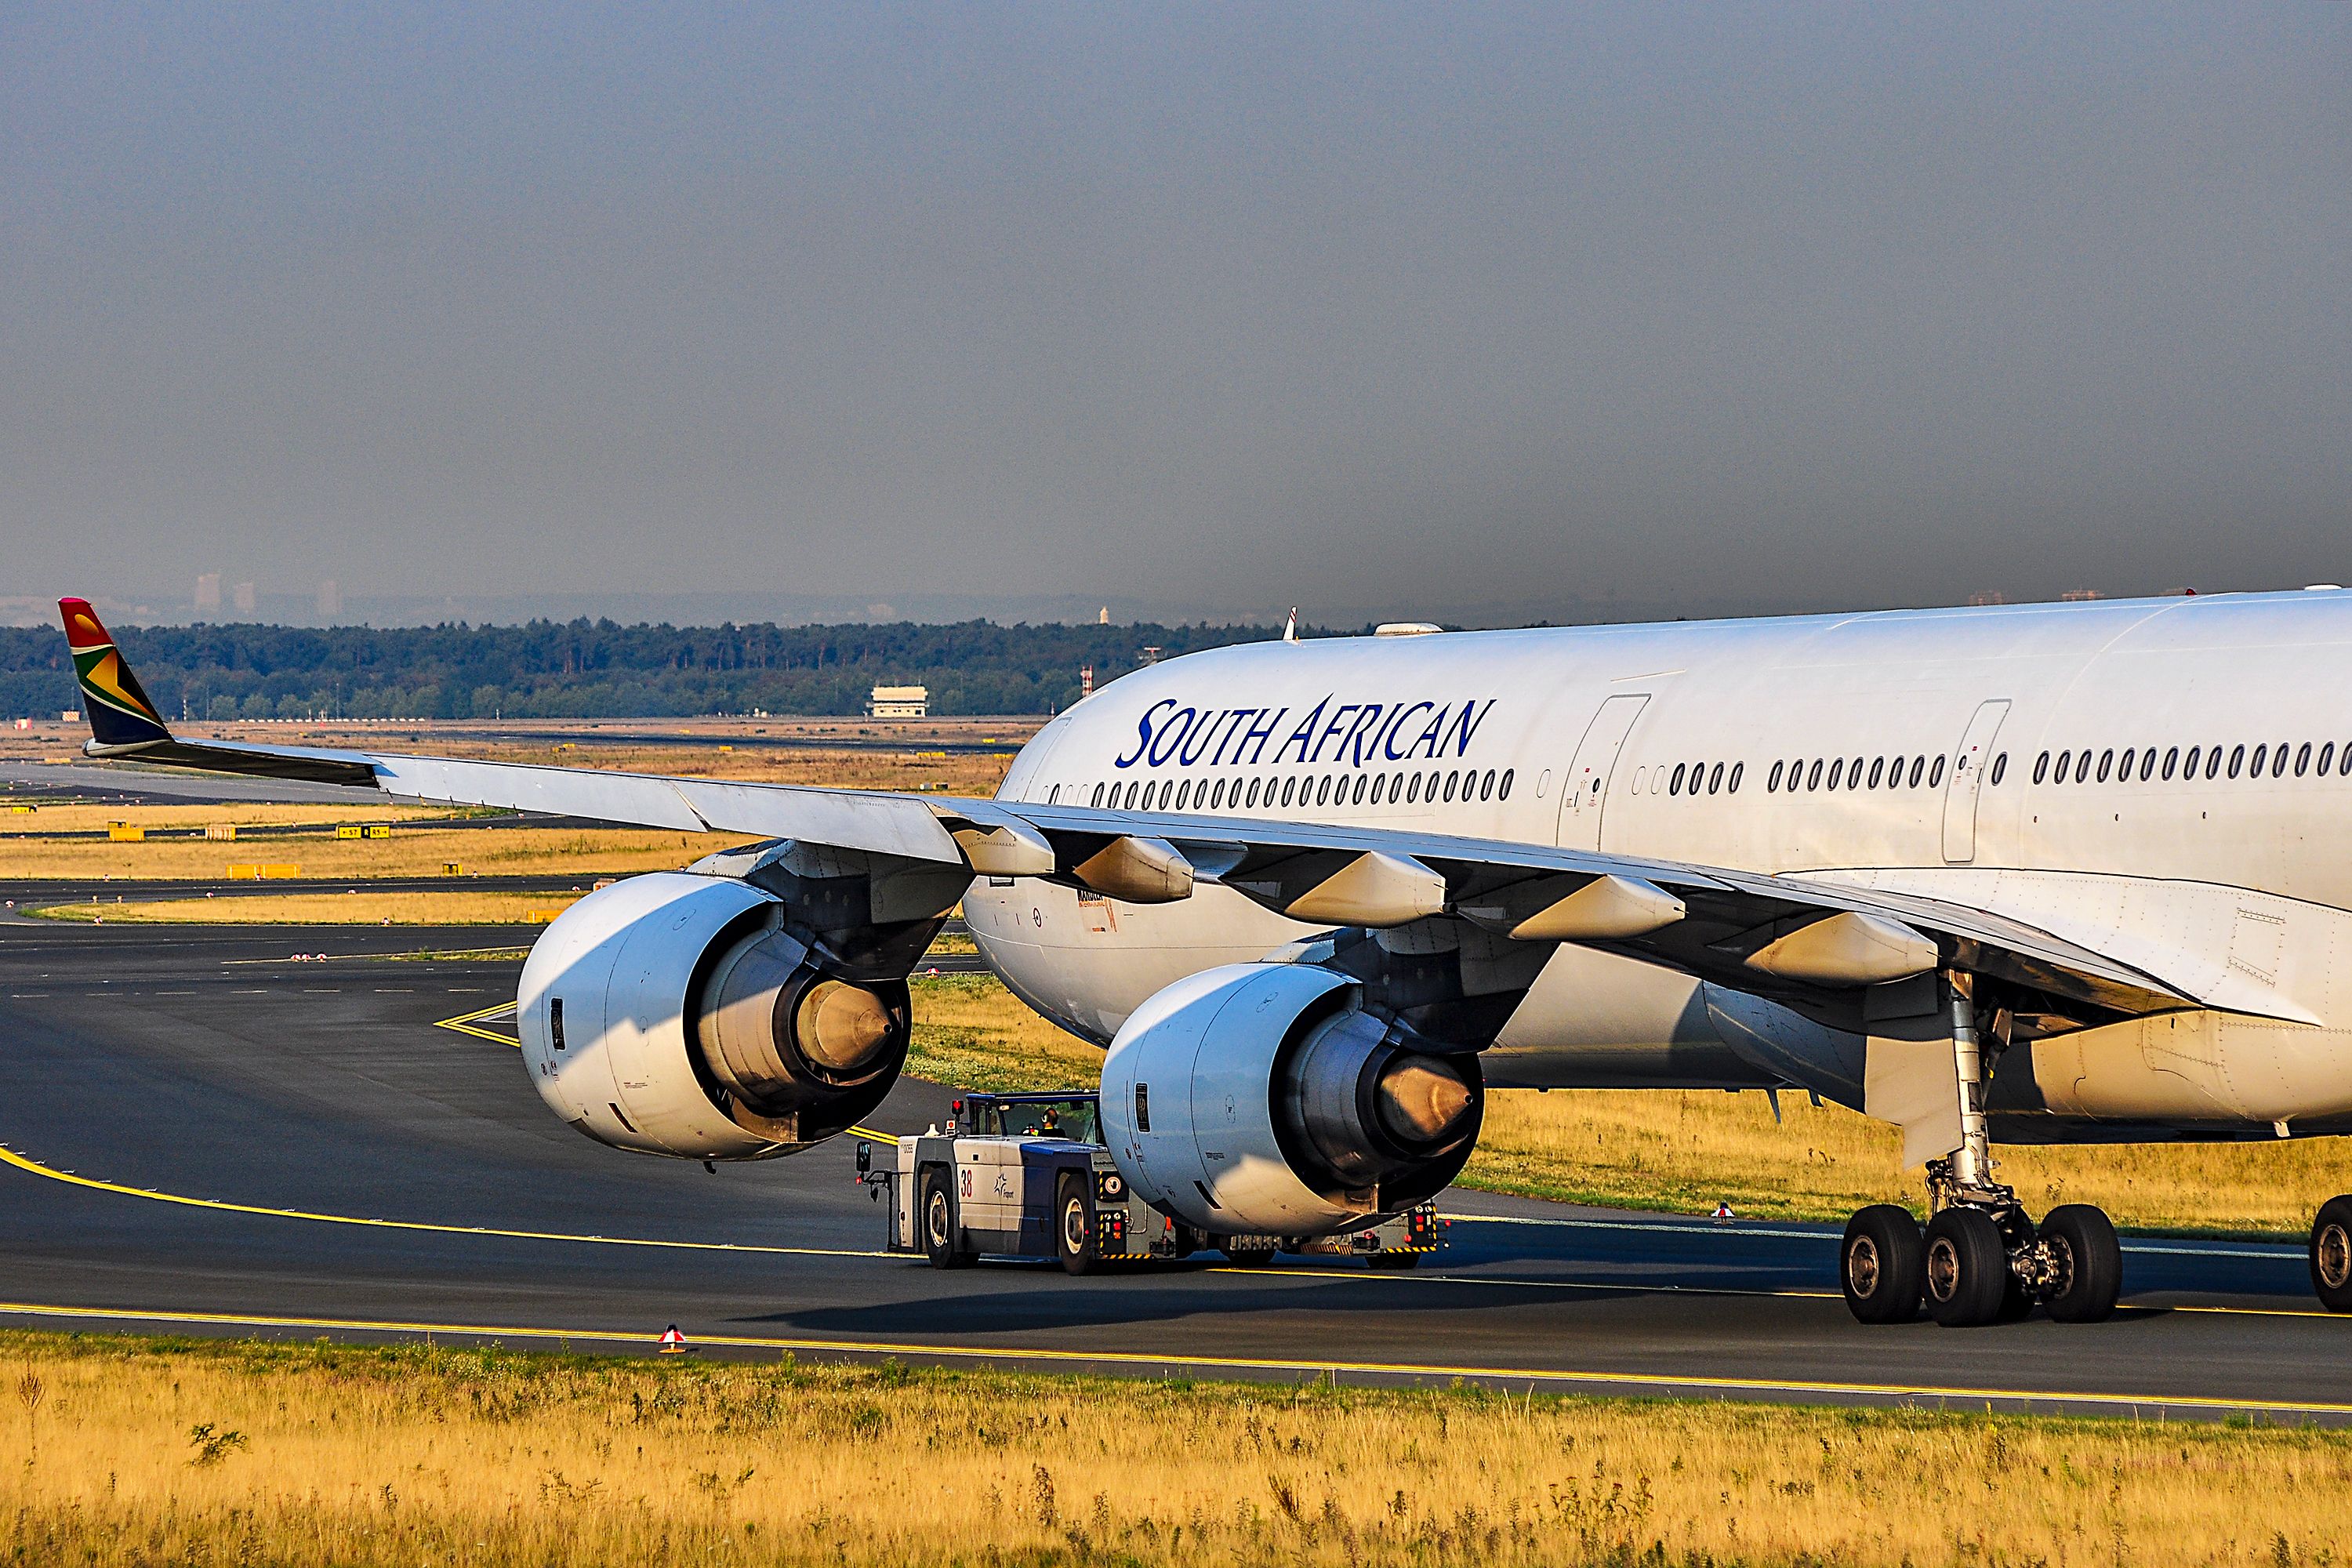 South African Airways on taxiway